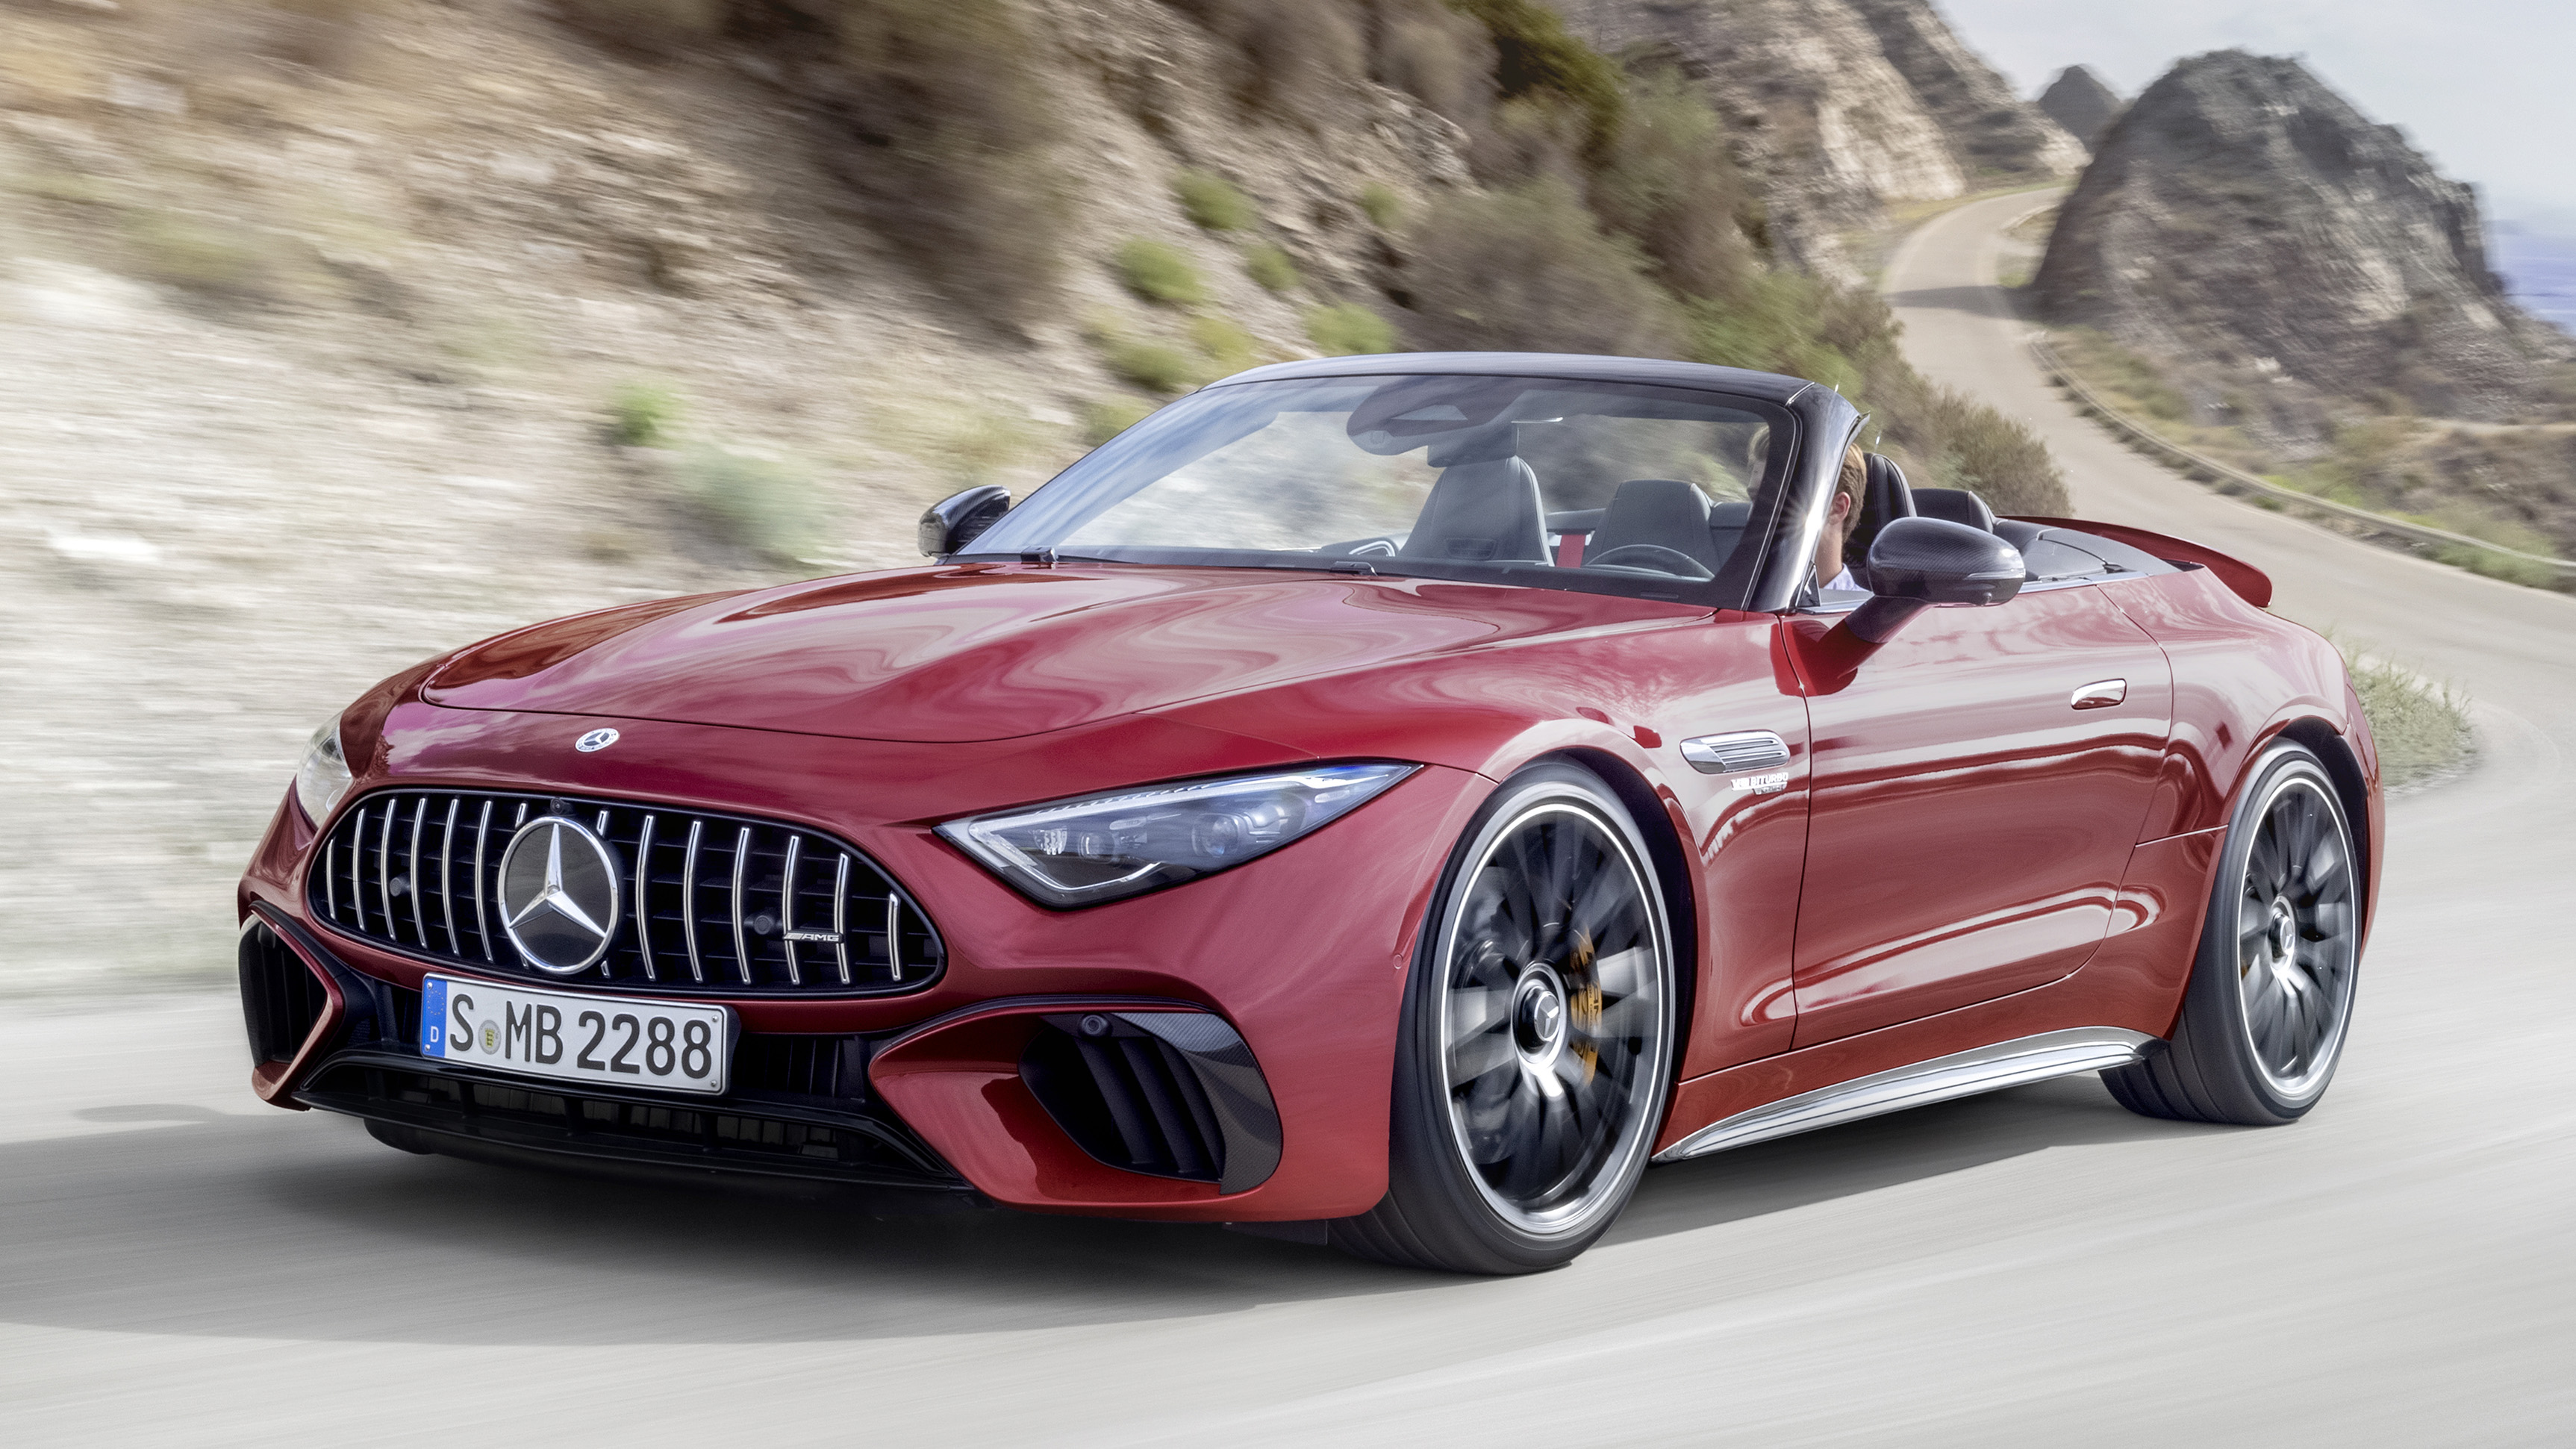 Official: this is the new Mercedes-AMG SL | Top Gear